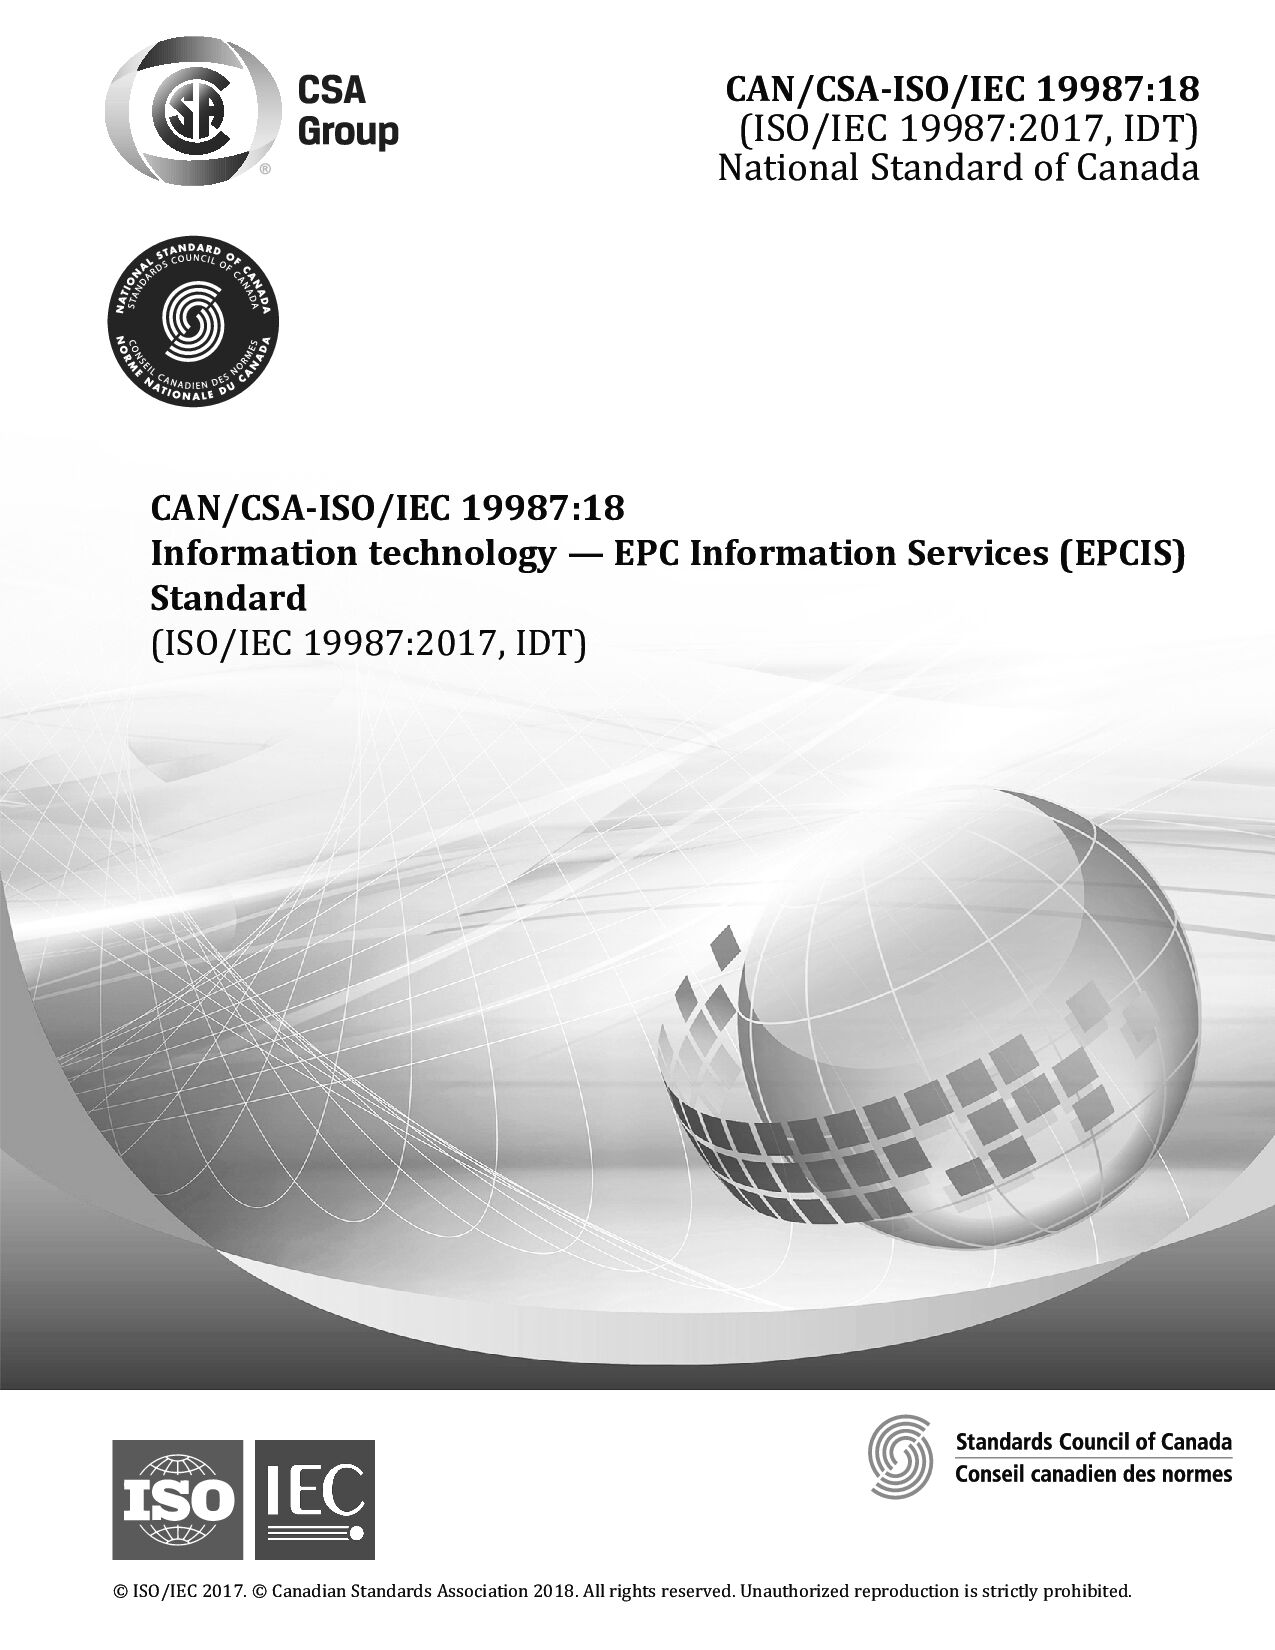 CAN/CSA-ISO/IEC 19987:2018